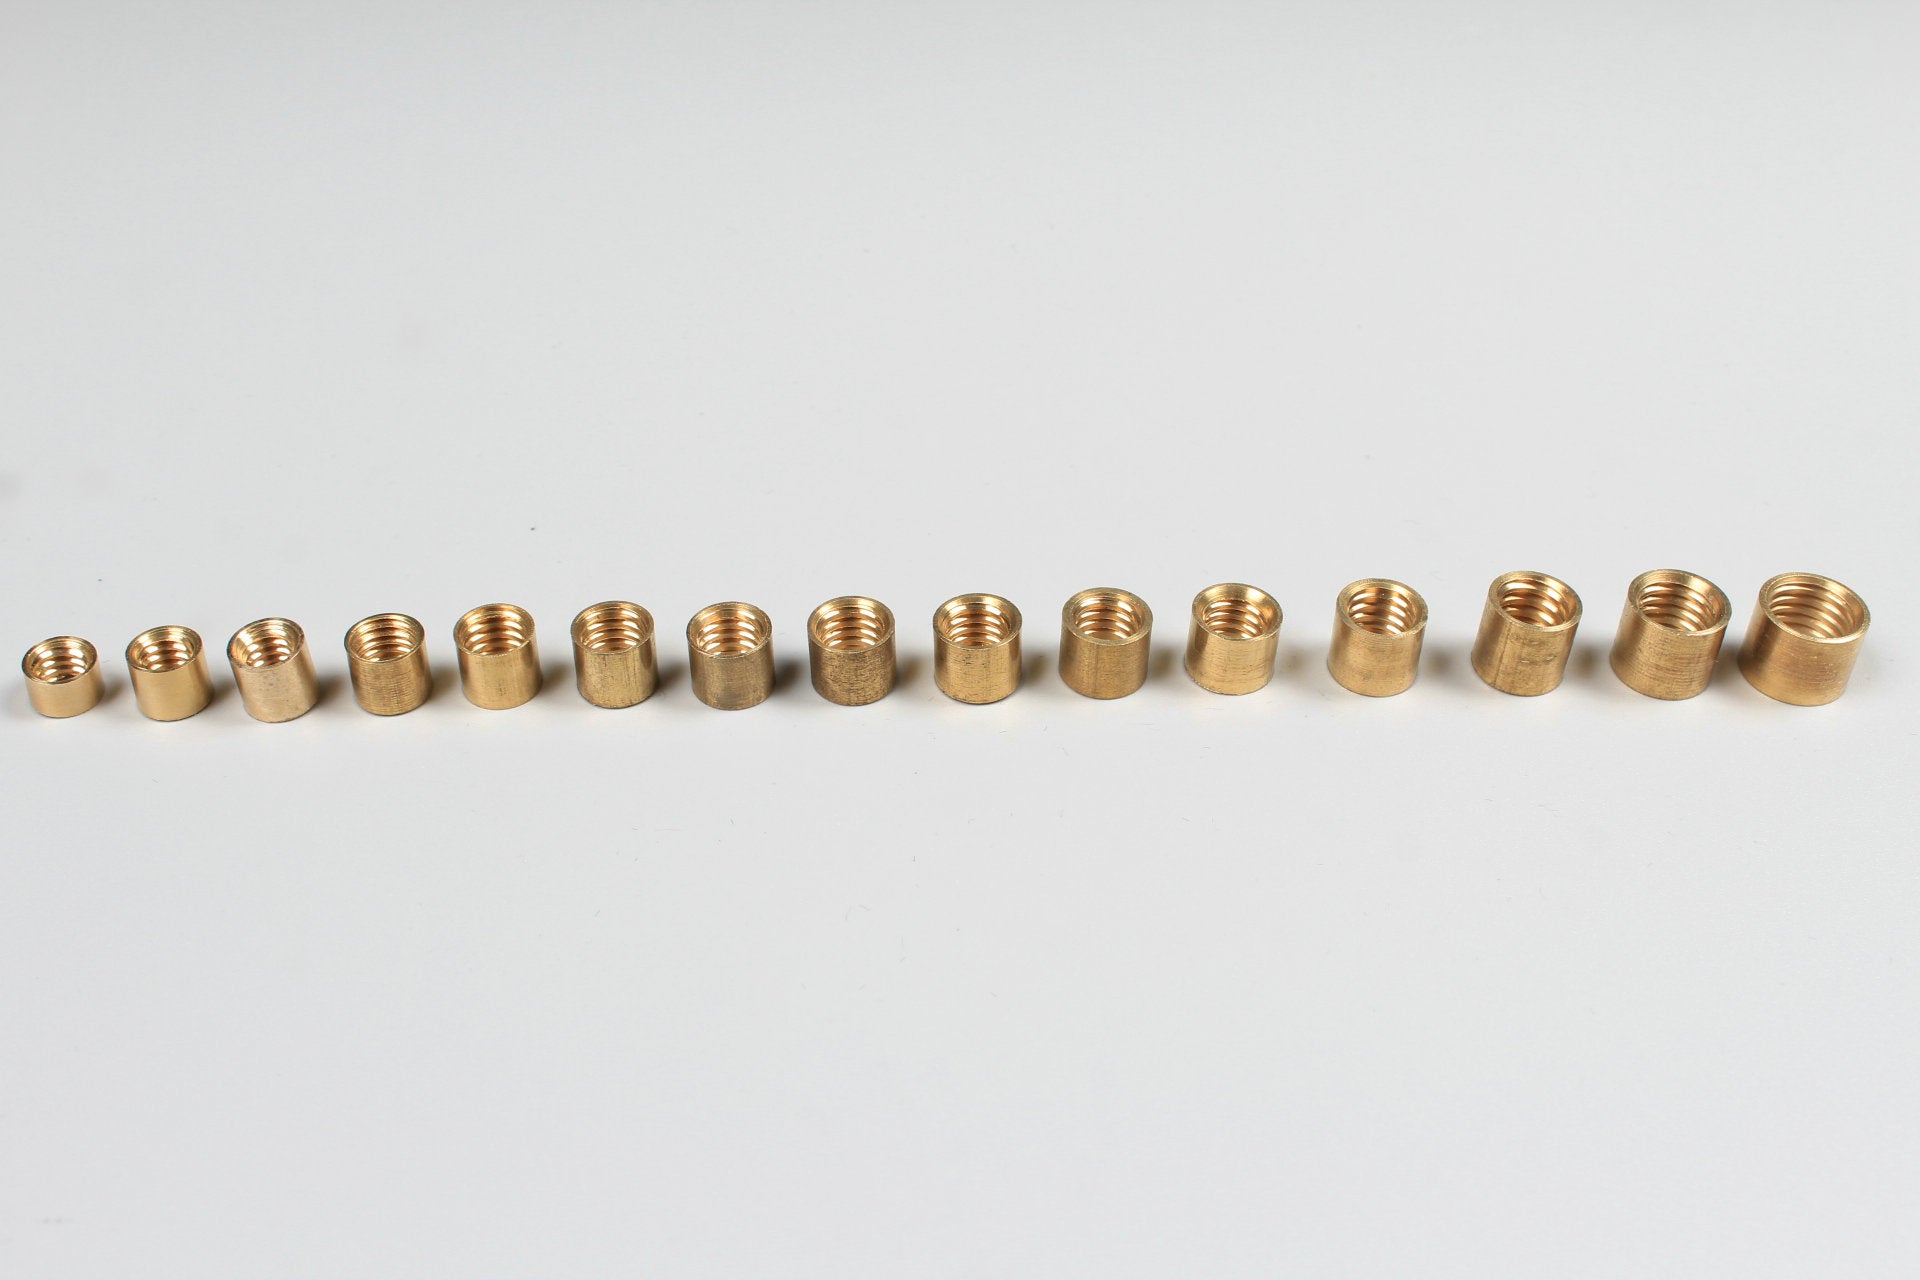 5 x brass snooker or pool cue ferrules - screw thread - various sizes